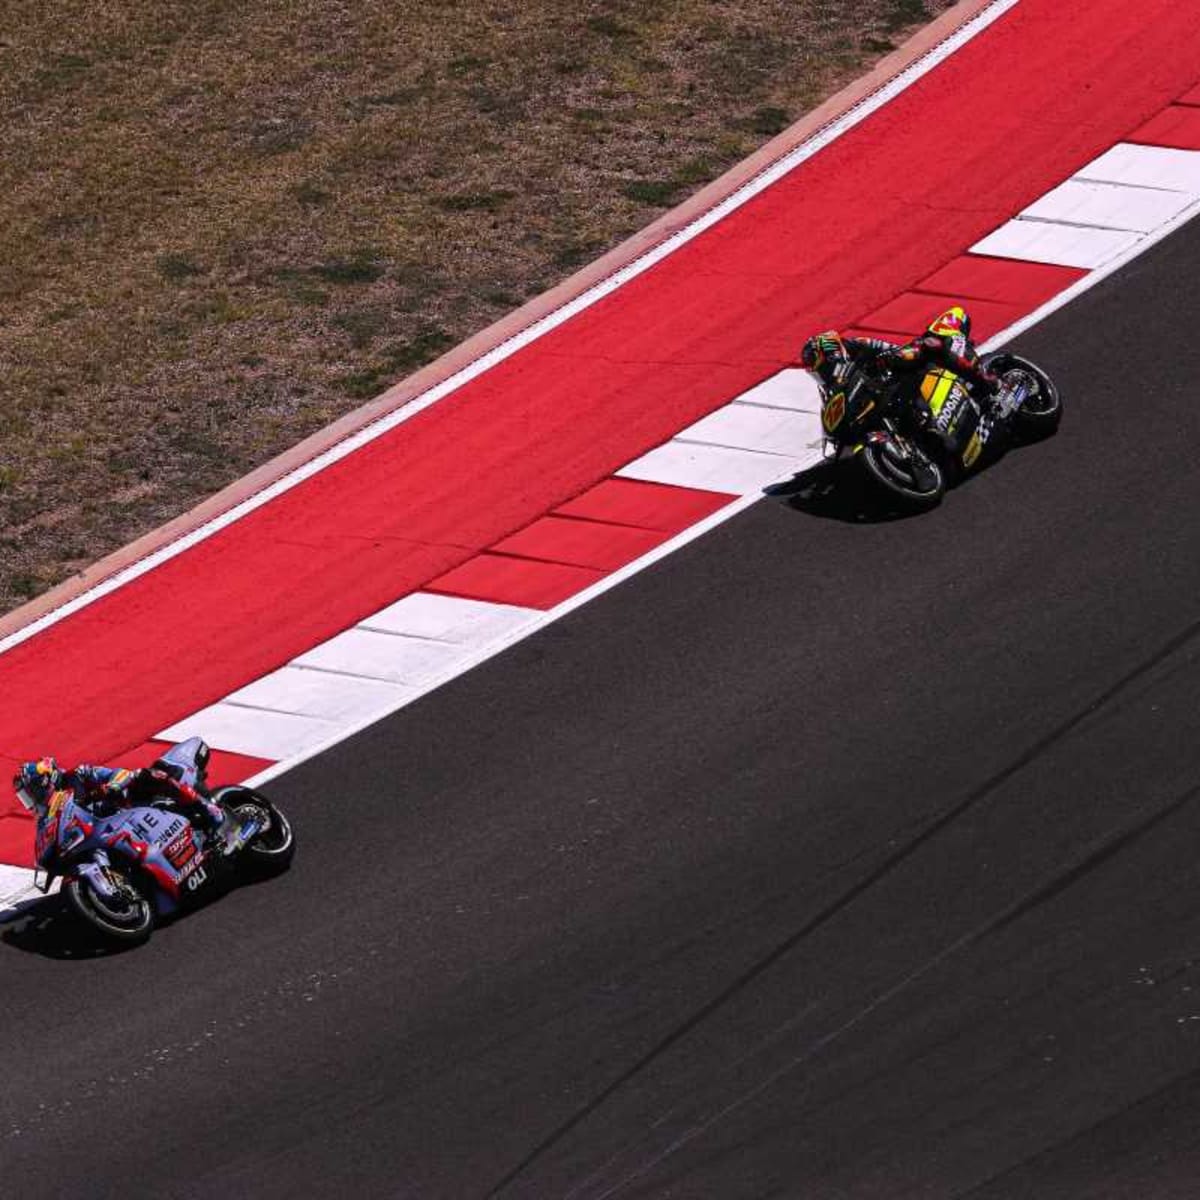 Grand Prix of the Americas stream Watch MotoGP online, TV channel - How to Watch and Stream Major League and College Sports